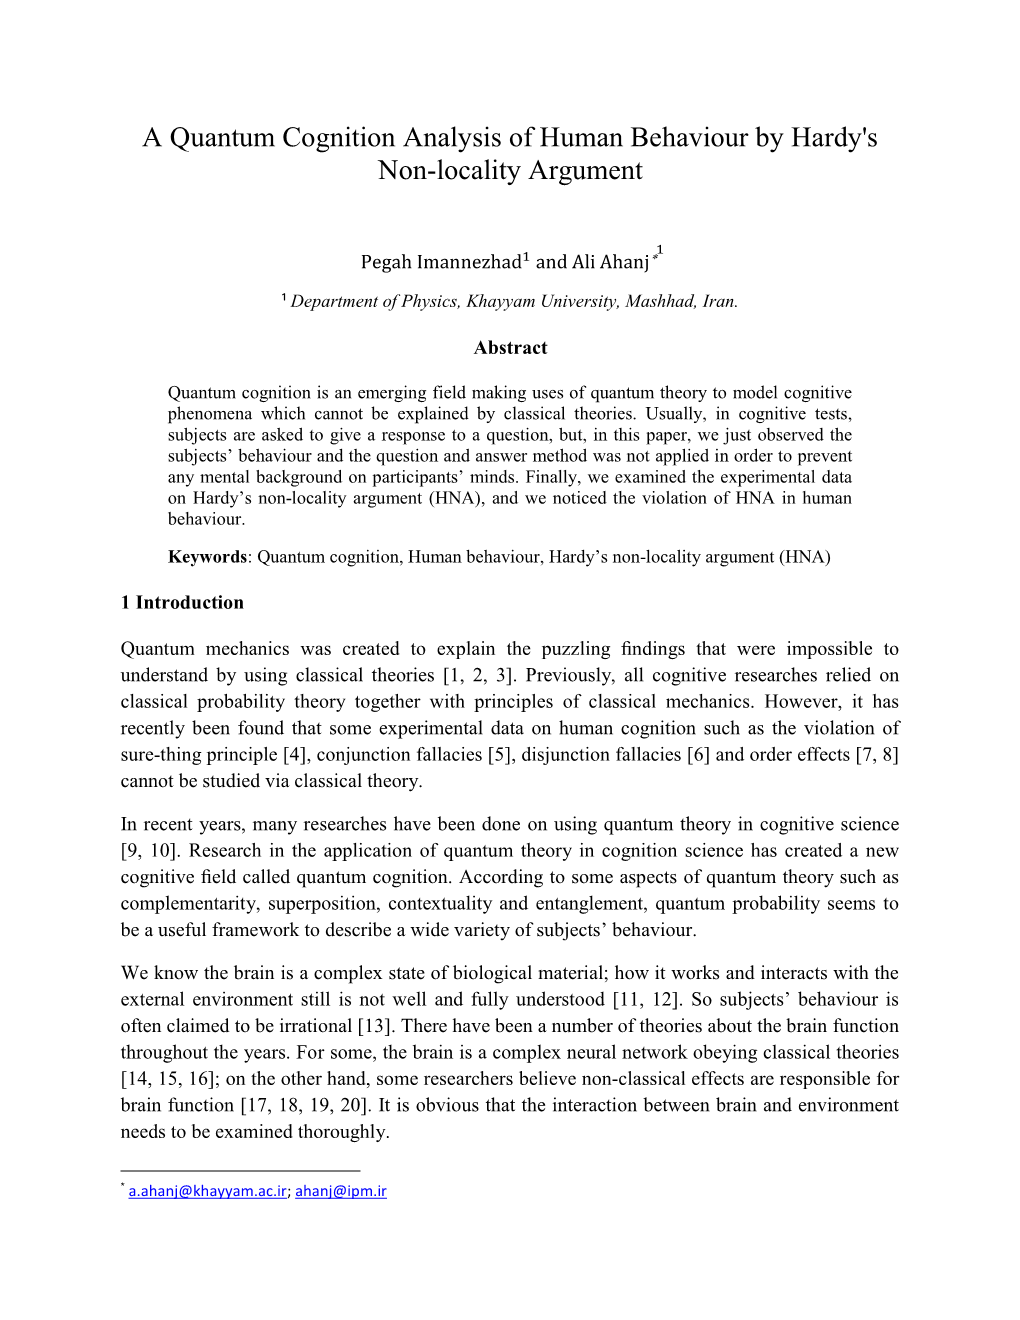 A Quantum Cognition Analysis of Human Behaviour by Hardy's Non-Locality Argument